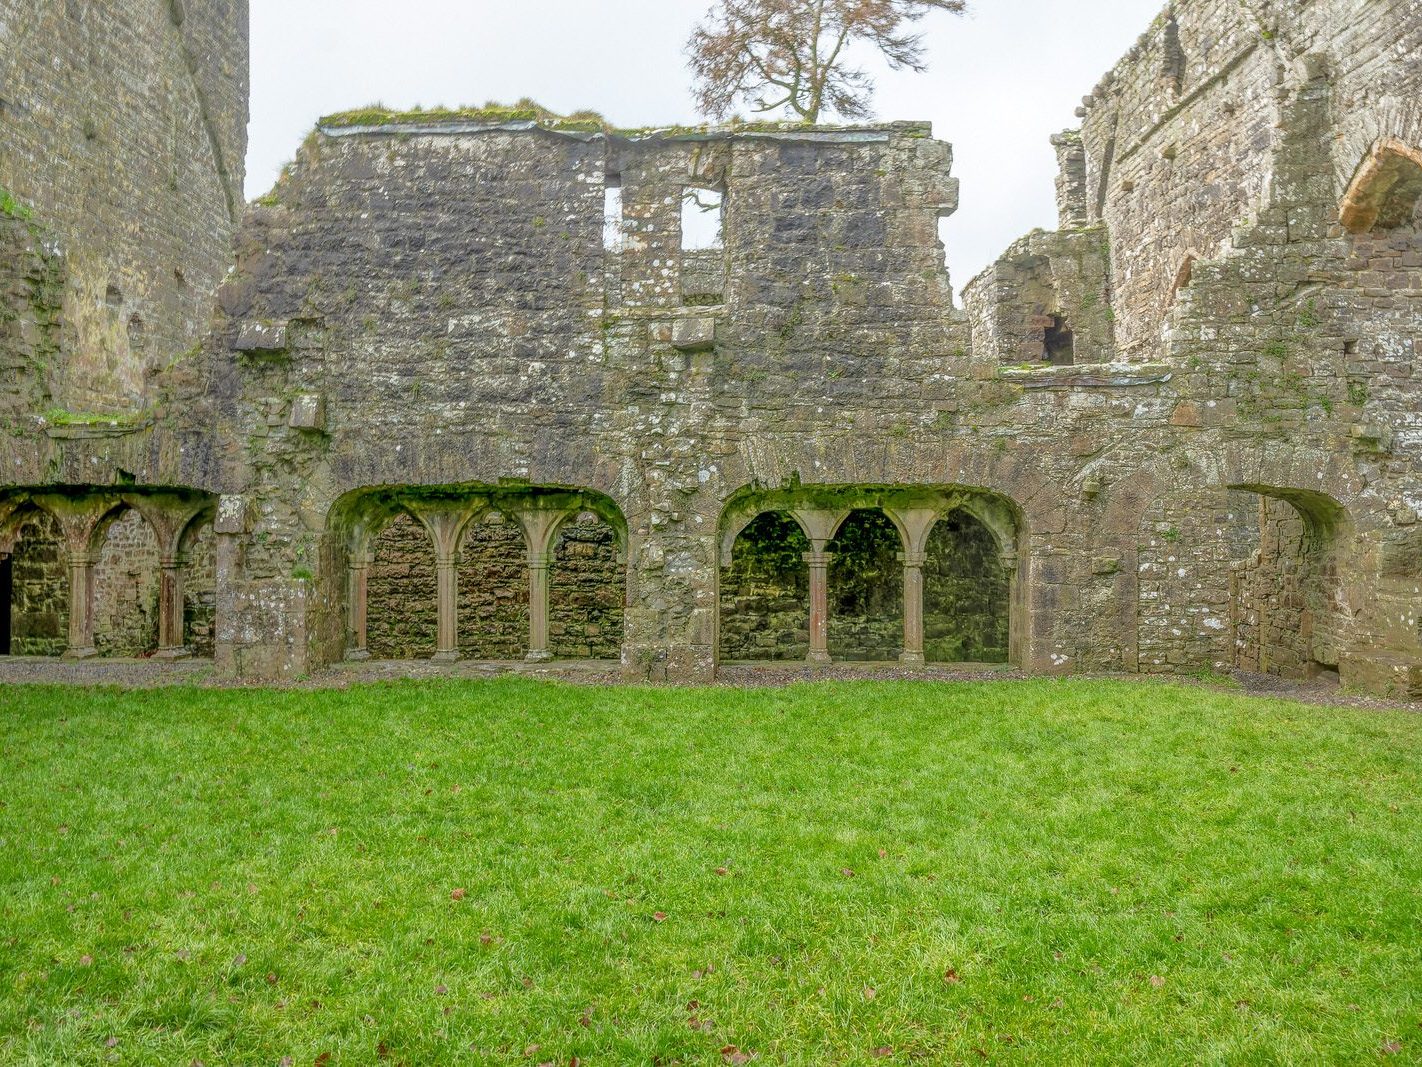 BECTIVE ABBEY WHICH I VISITED LAST CHRISTMAS [THERE WERE NO OTHER VISITORS AS IT WAS A VERY WET DAY]--225222-1